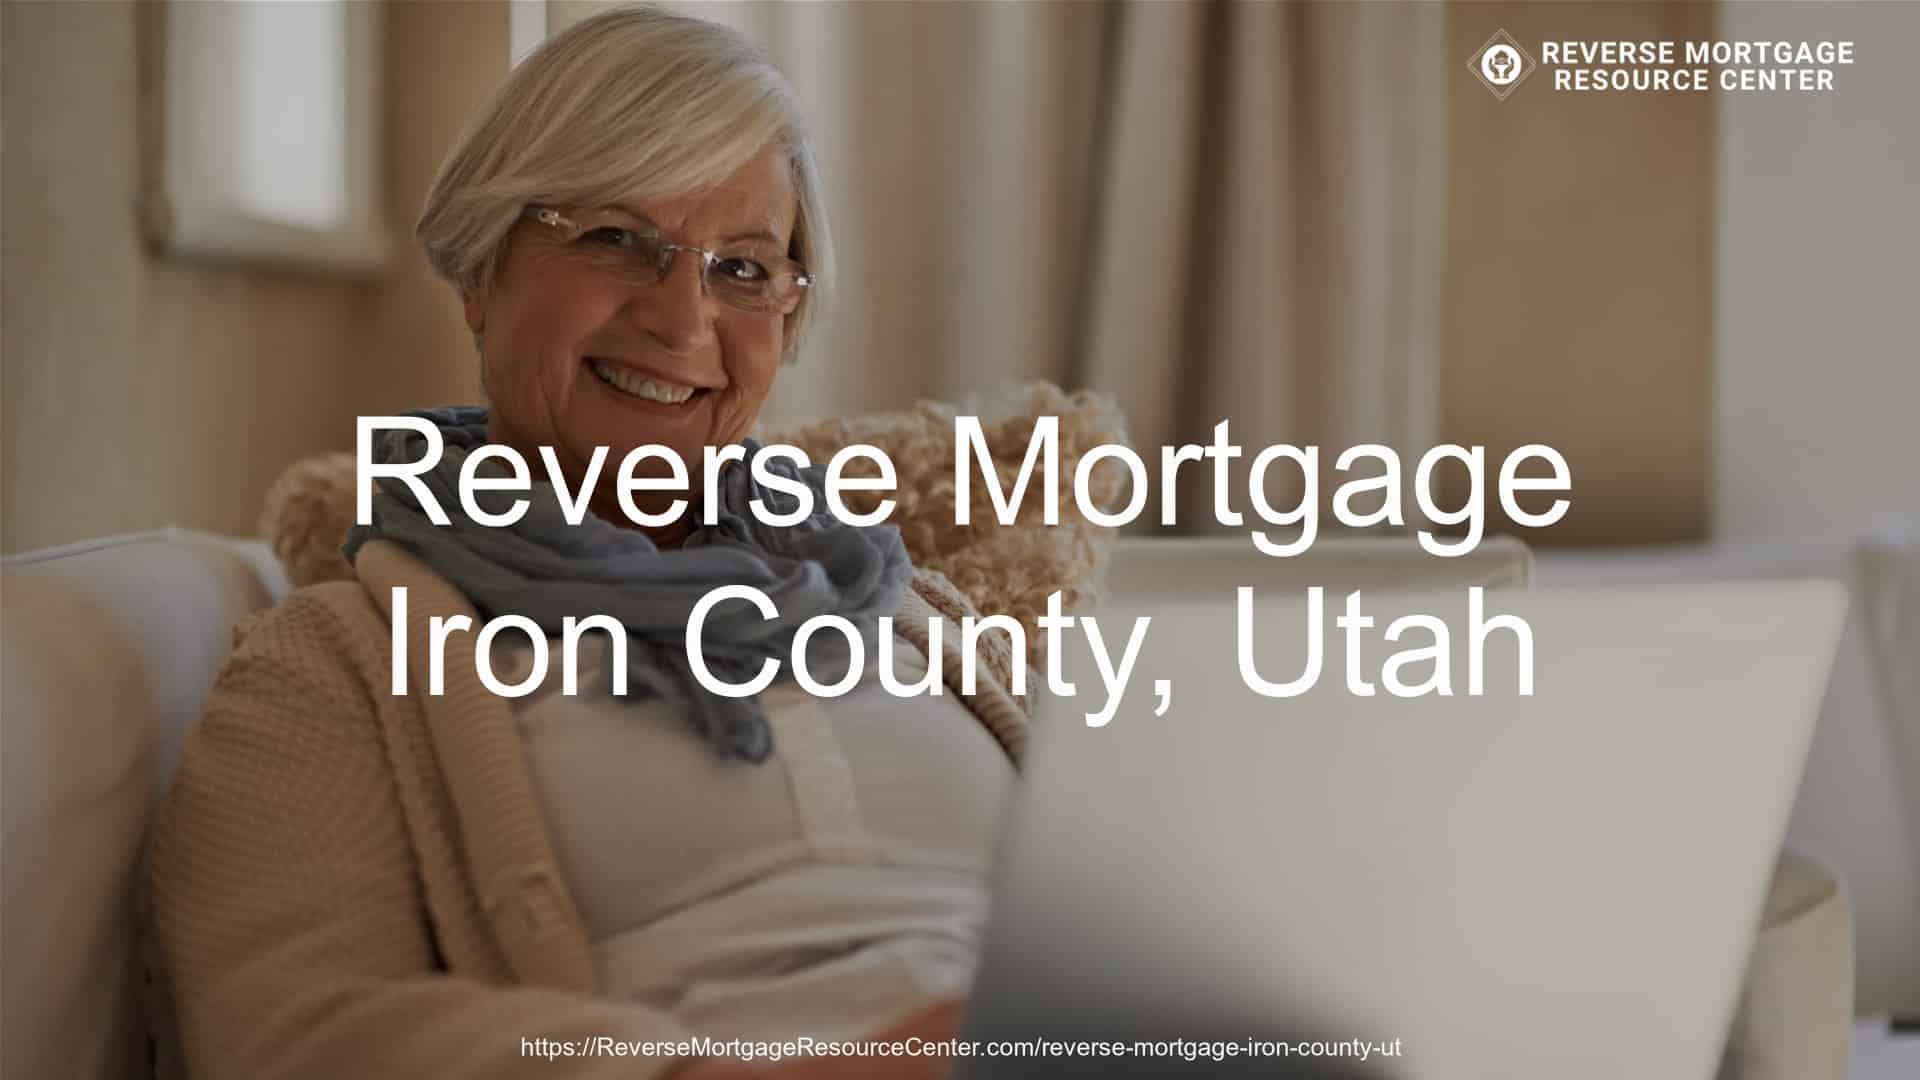 Reverse Mortgage Loans in Iron County Utah